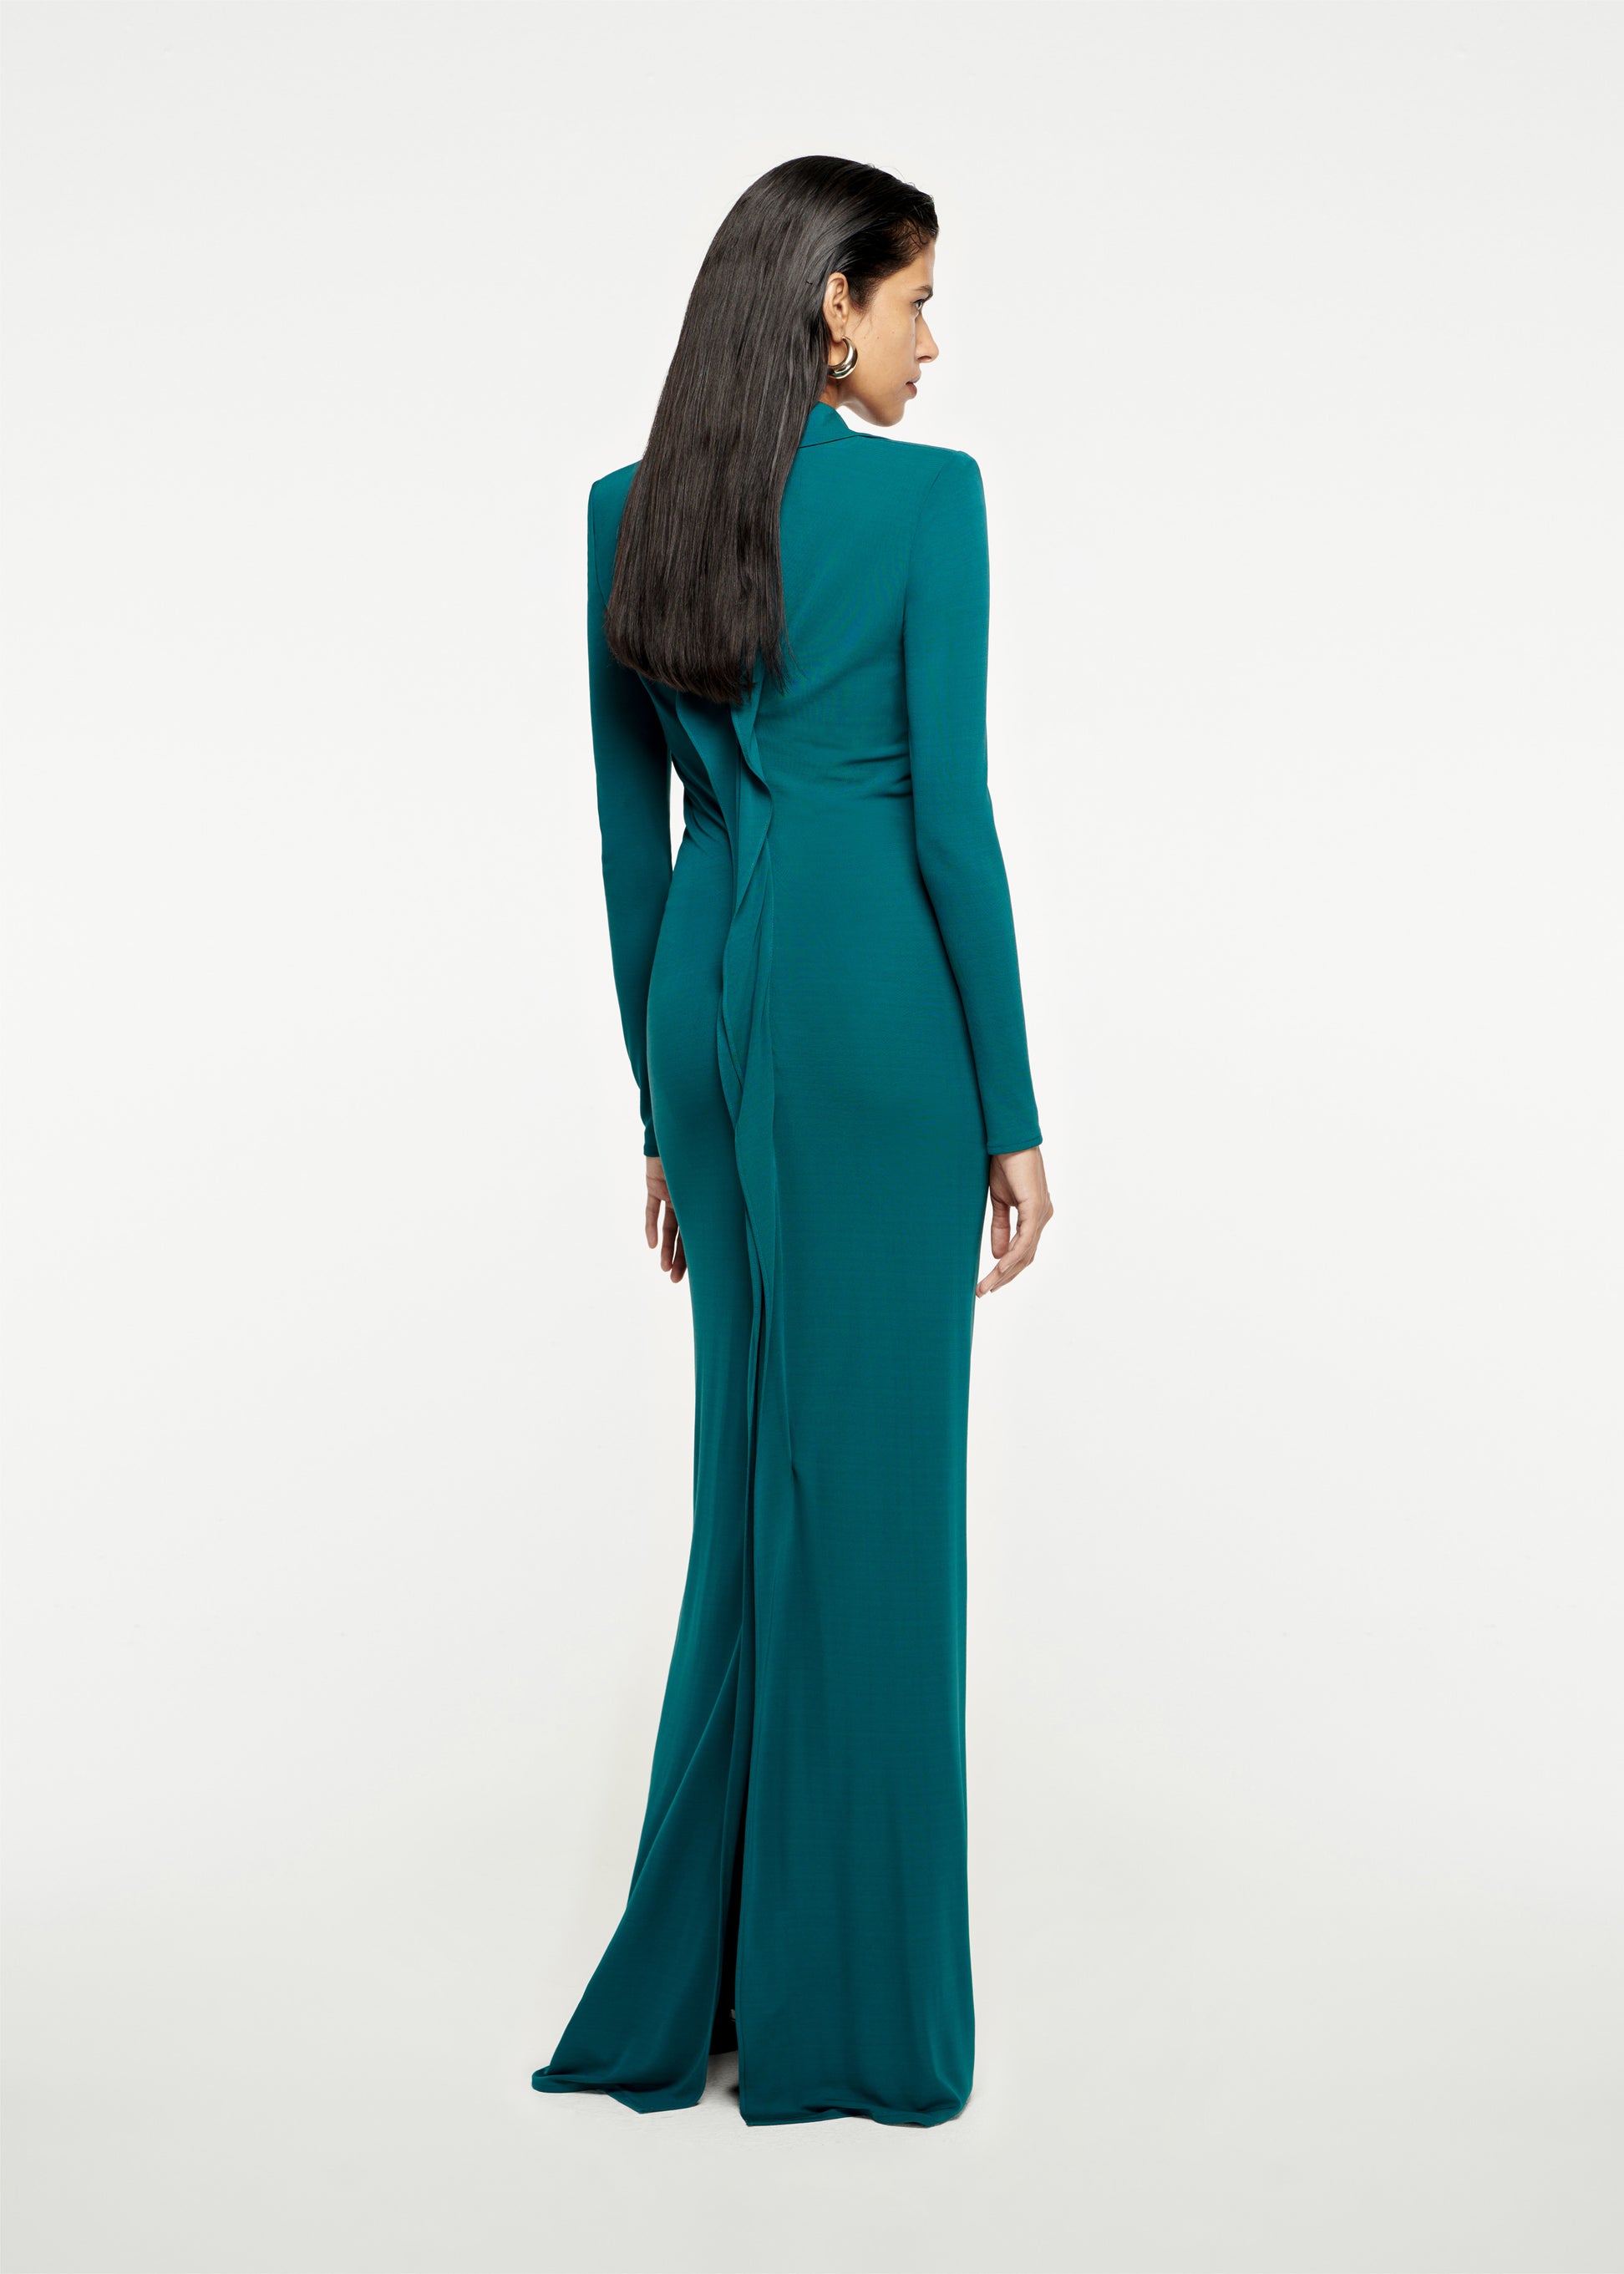 The back of a woman wearing the Long Sleeve Jersey Maxi Dress Dark in Green 